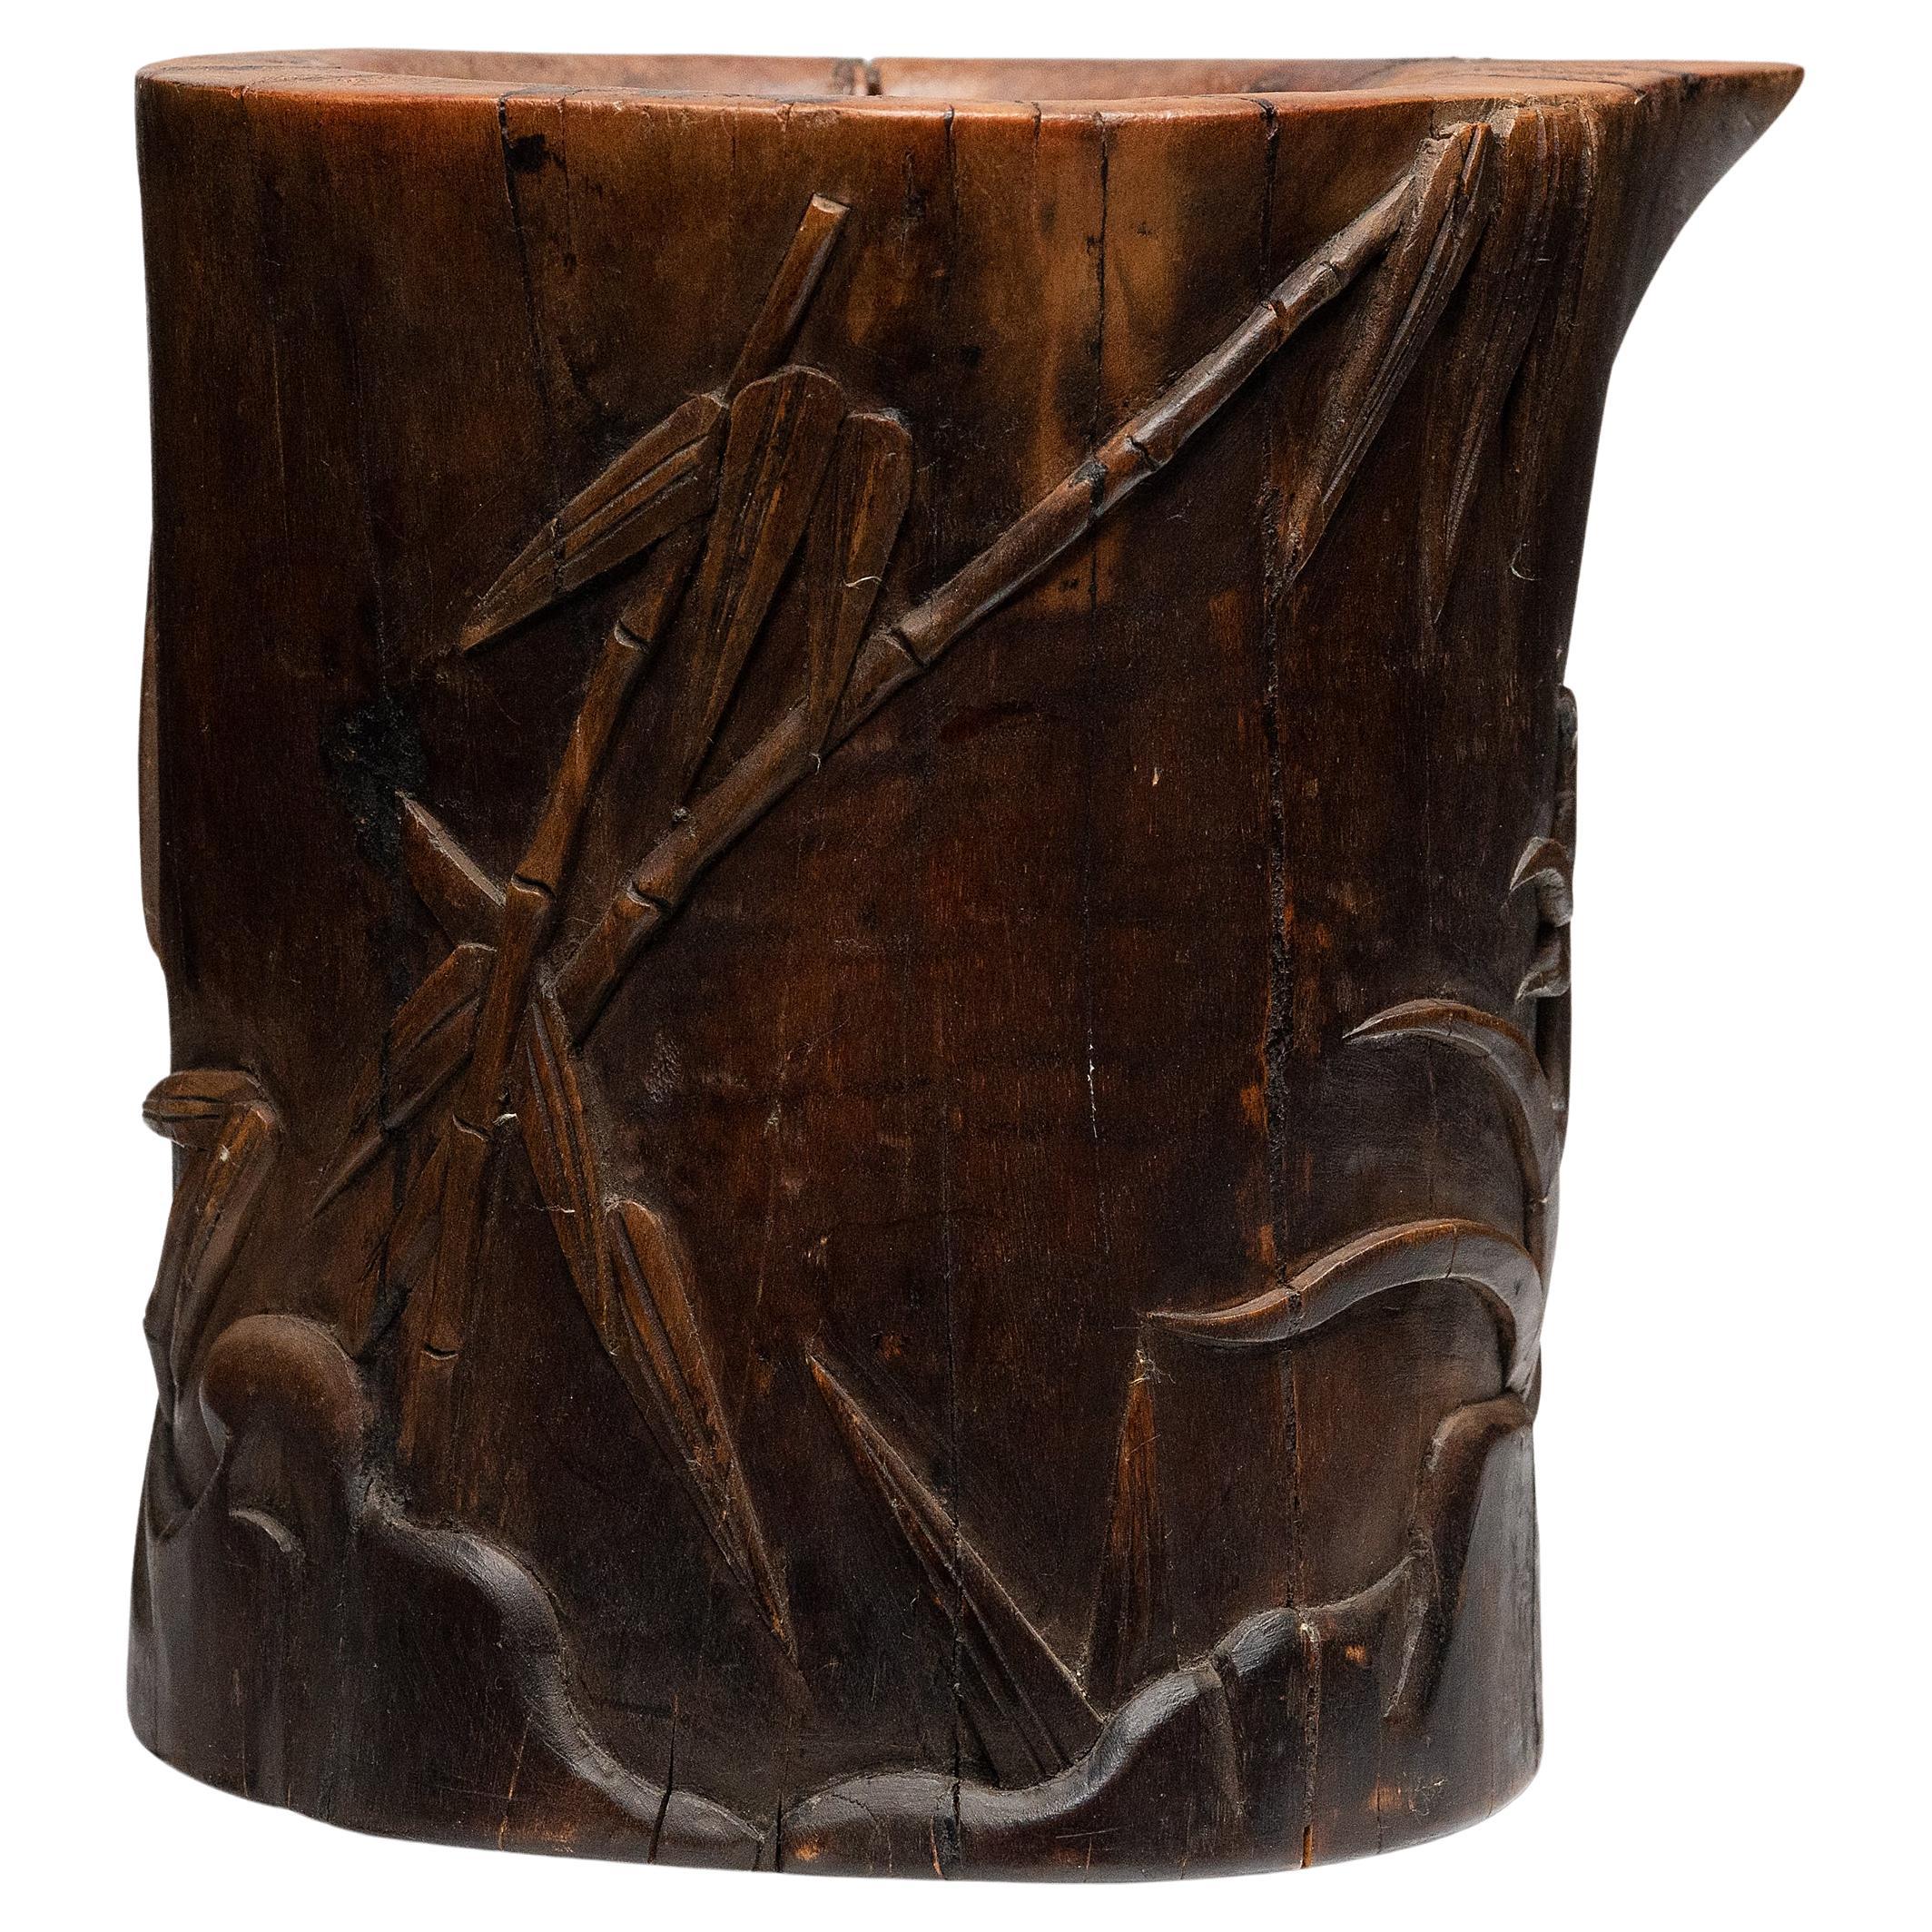 Wooden Chinese Brush Pot with Bamboo Carvings, c. 1900